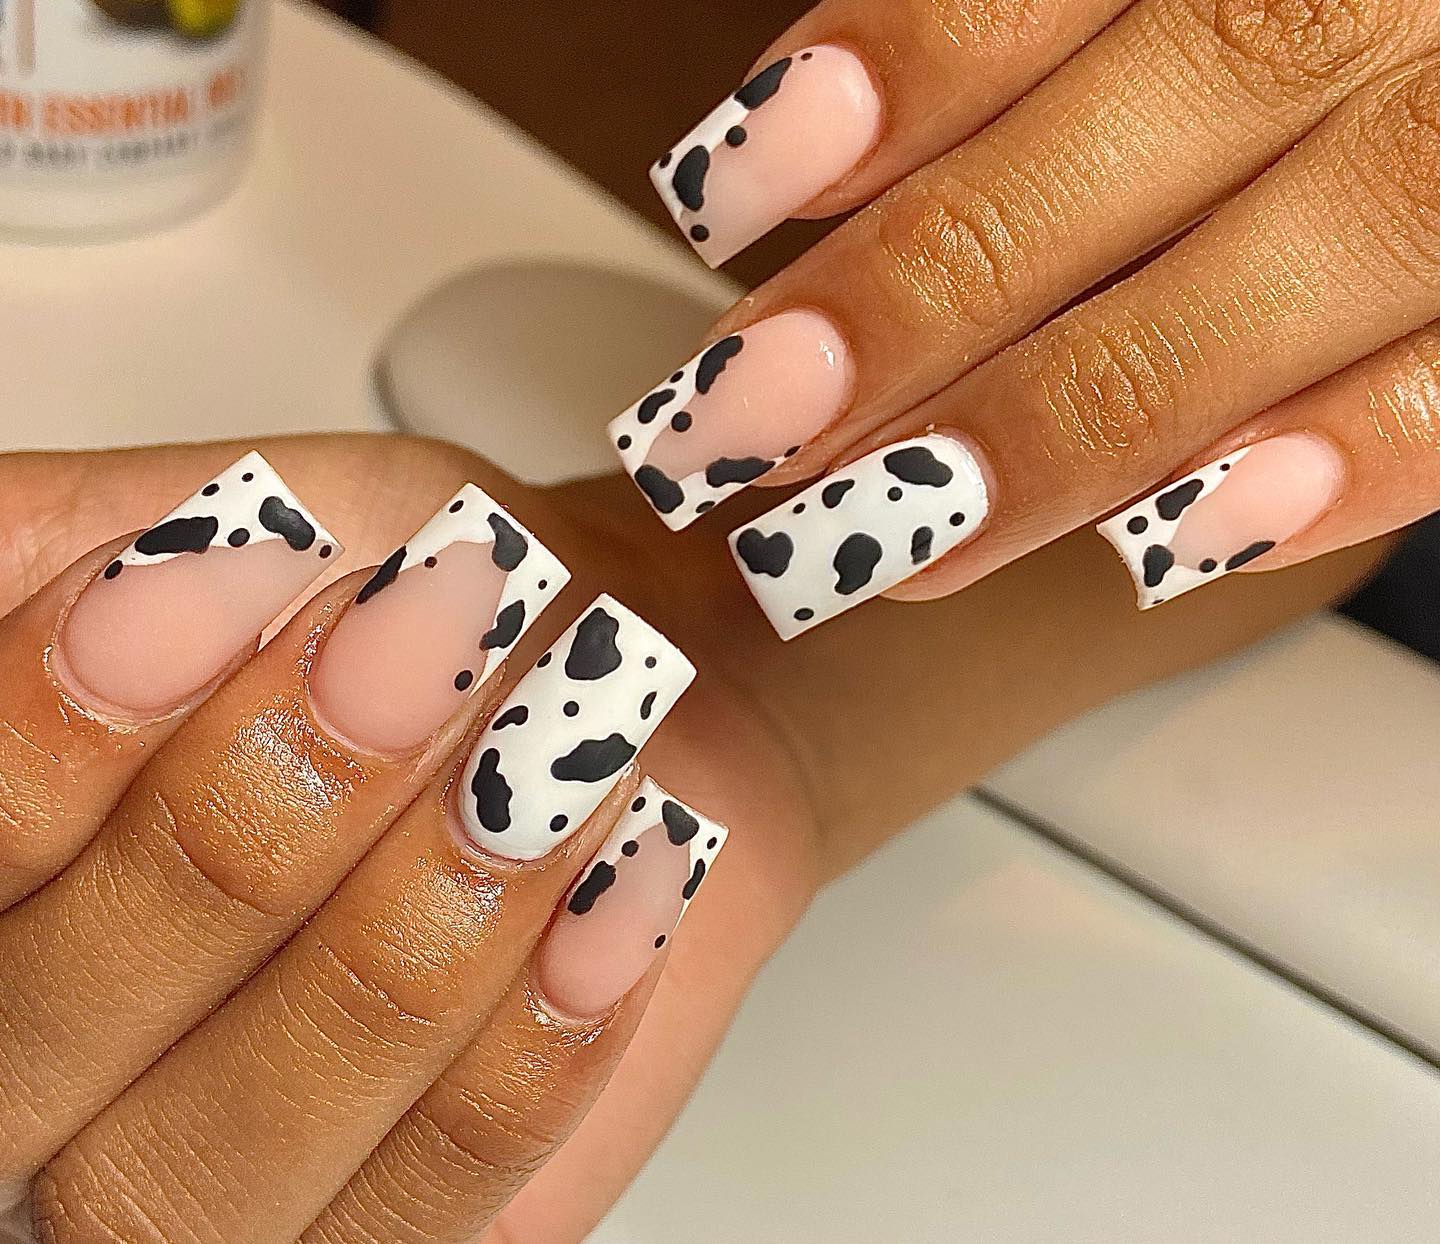 Isn't this nail design lovely? It's nice to see how they're more subtle than your typical French manicure, but still have a little bit of color. If you are looking for a cow print nail design that will make a statement, this is the one you should go for.